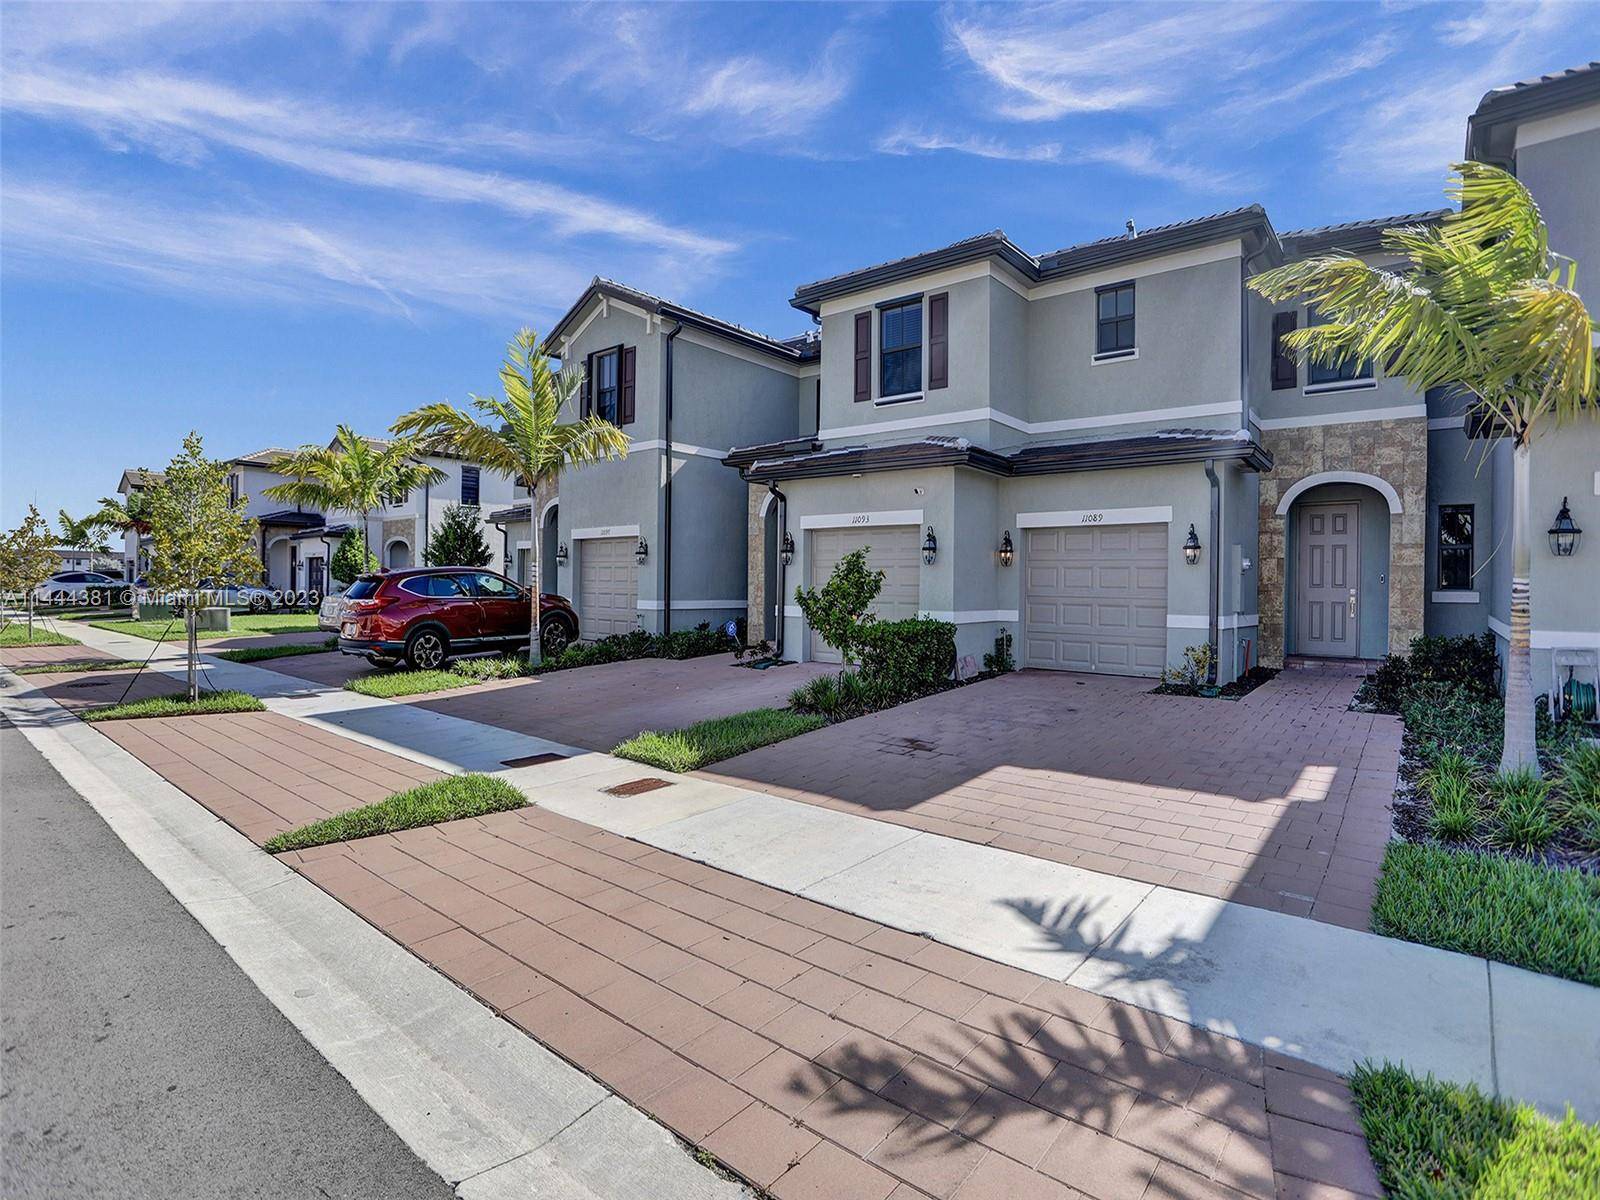 Beautiful newer home in AquaBella with garage in a masterplan community in Hialeah, FL, that offers a convenient location and a myriad of amenities.